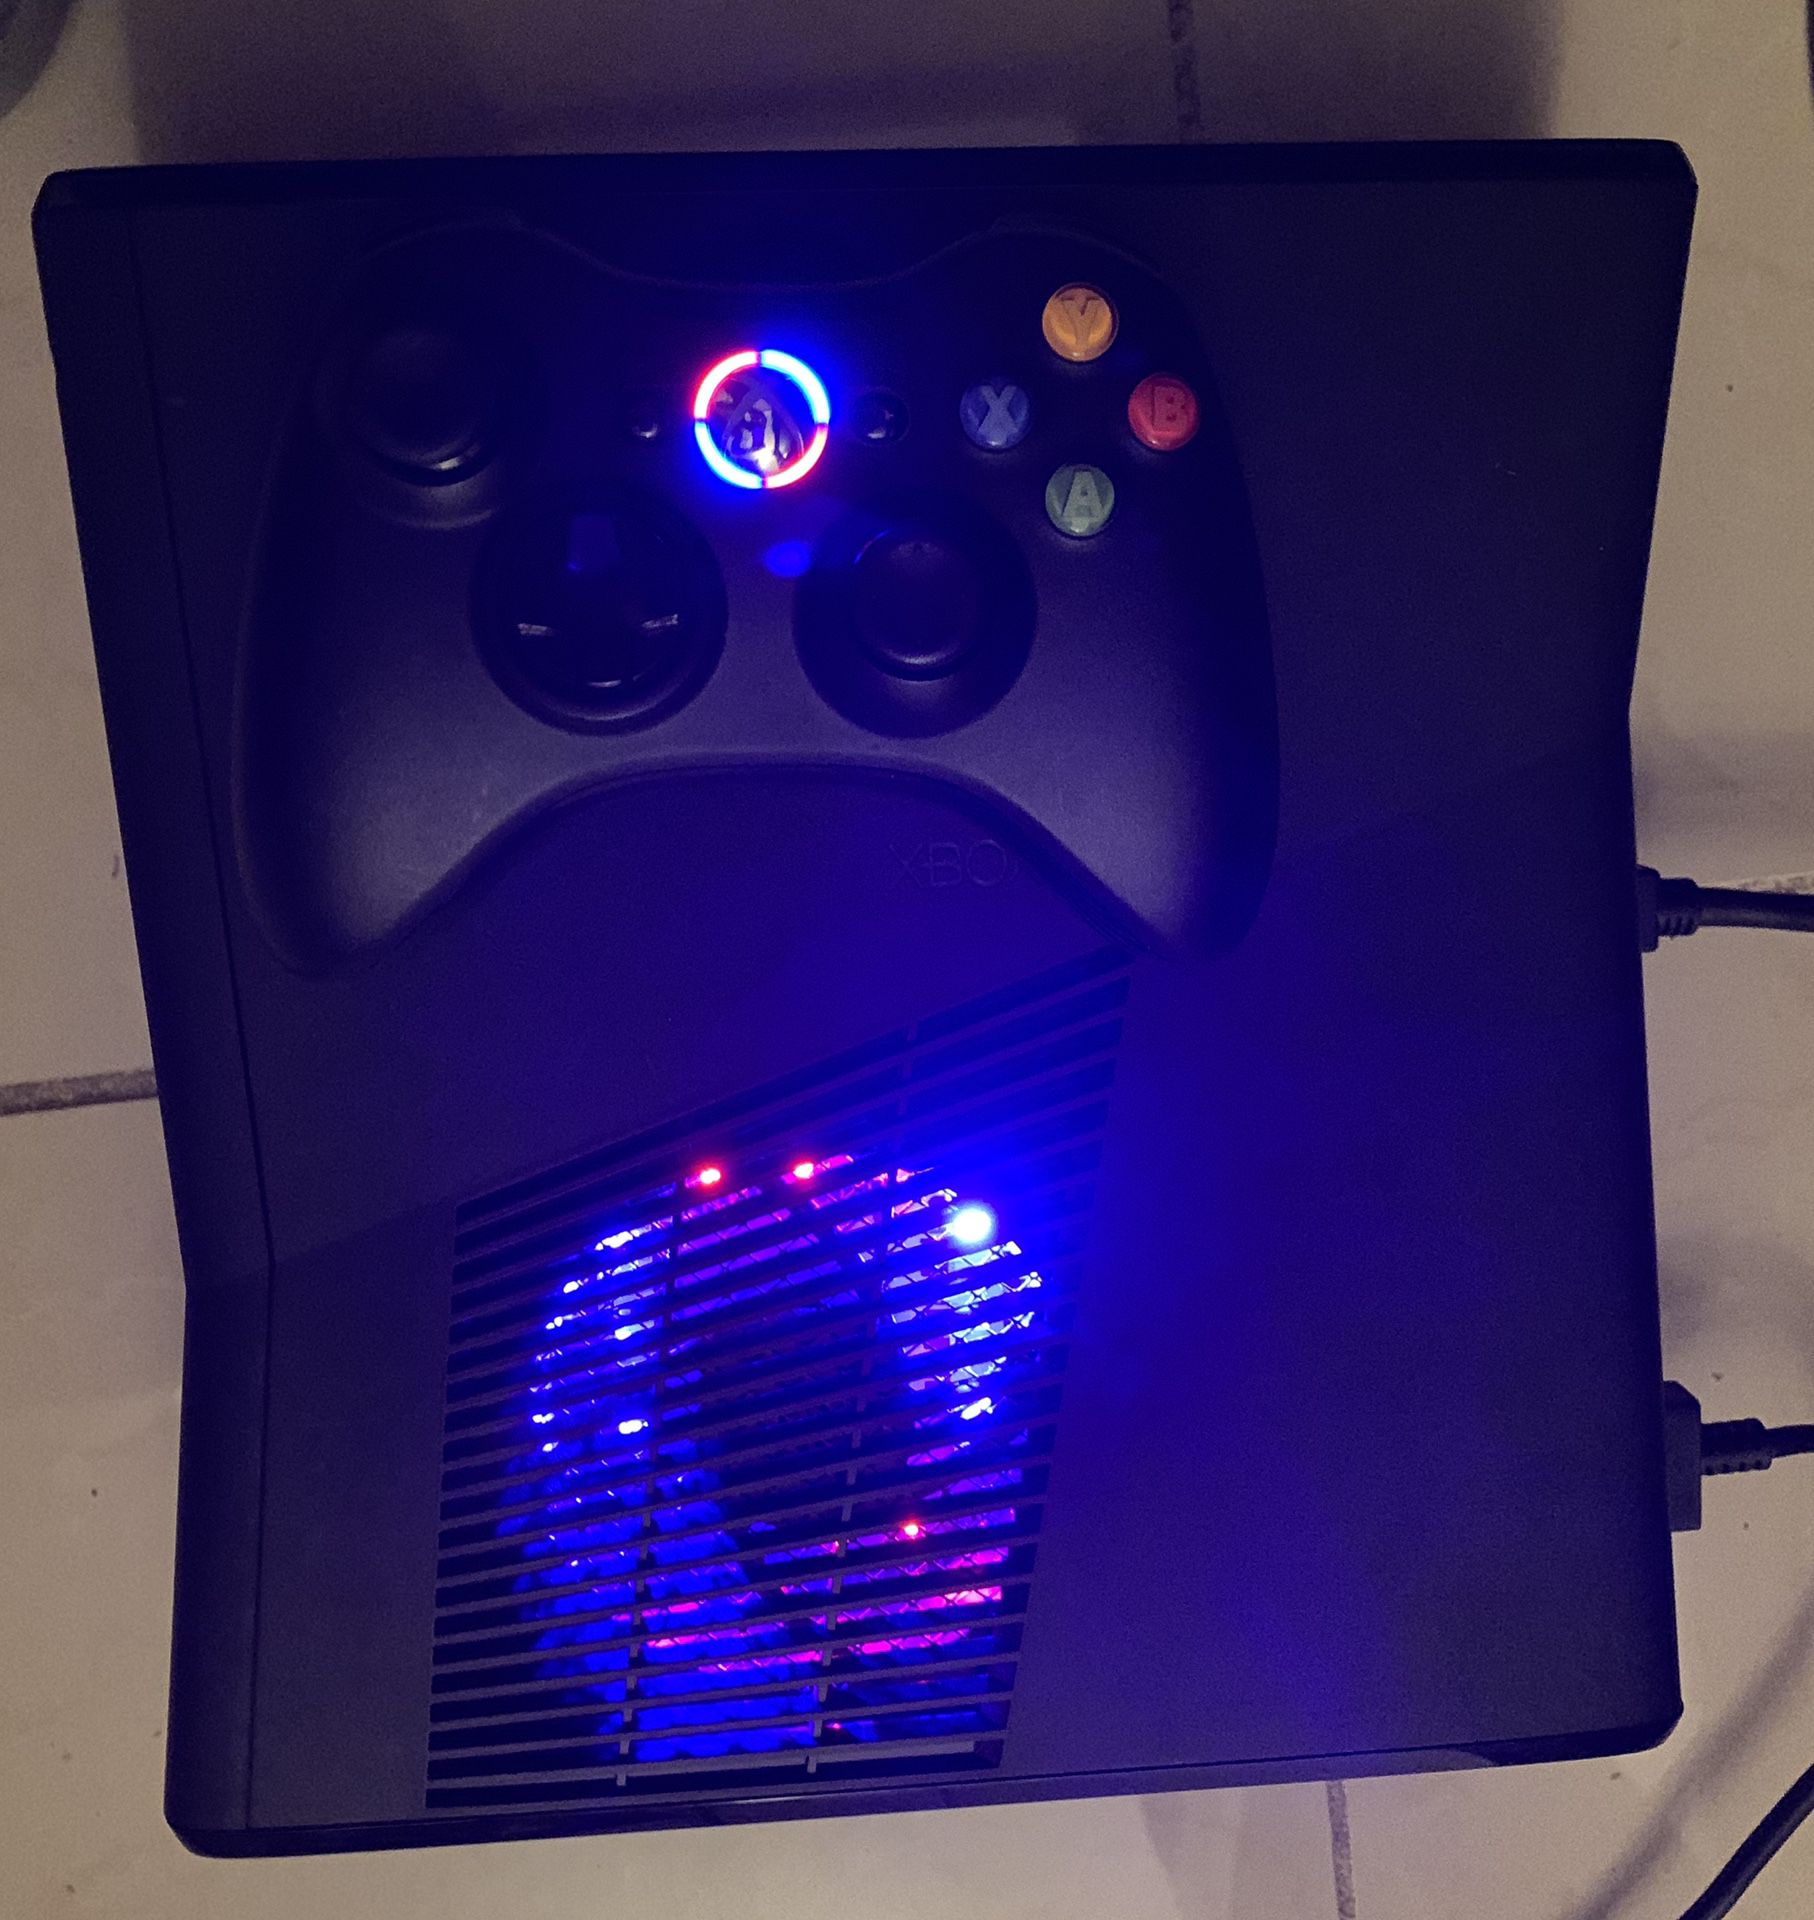 Xbox 360 Slim with Rgh chip ace v3 320gb blue and red led